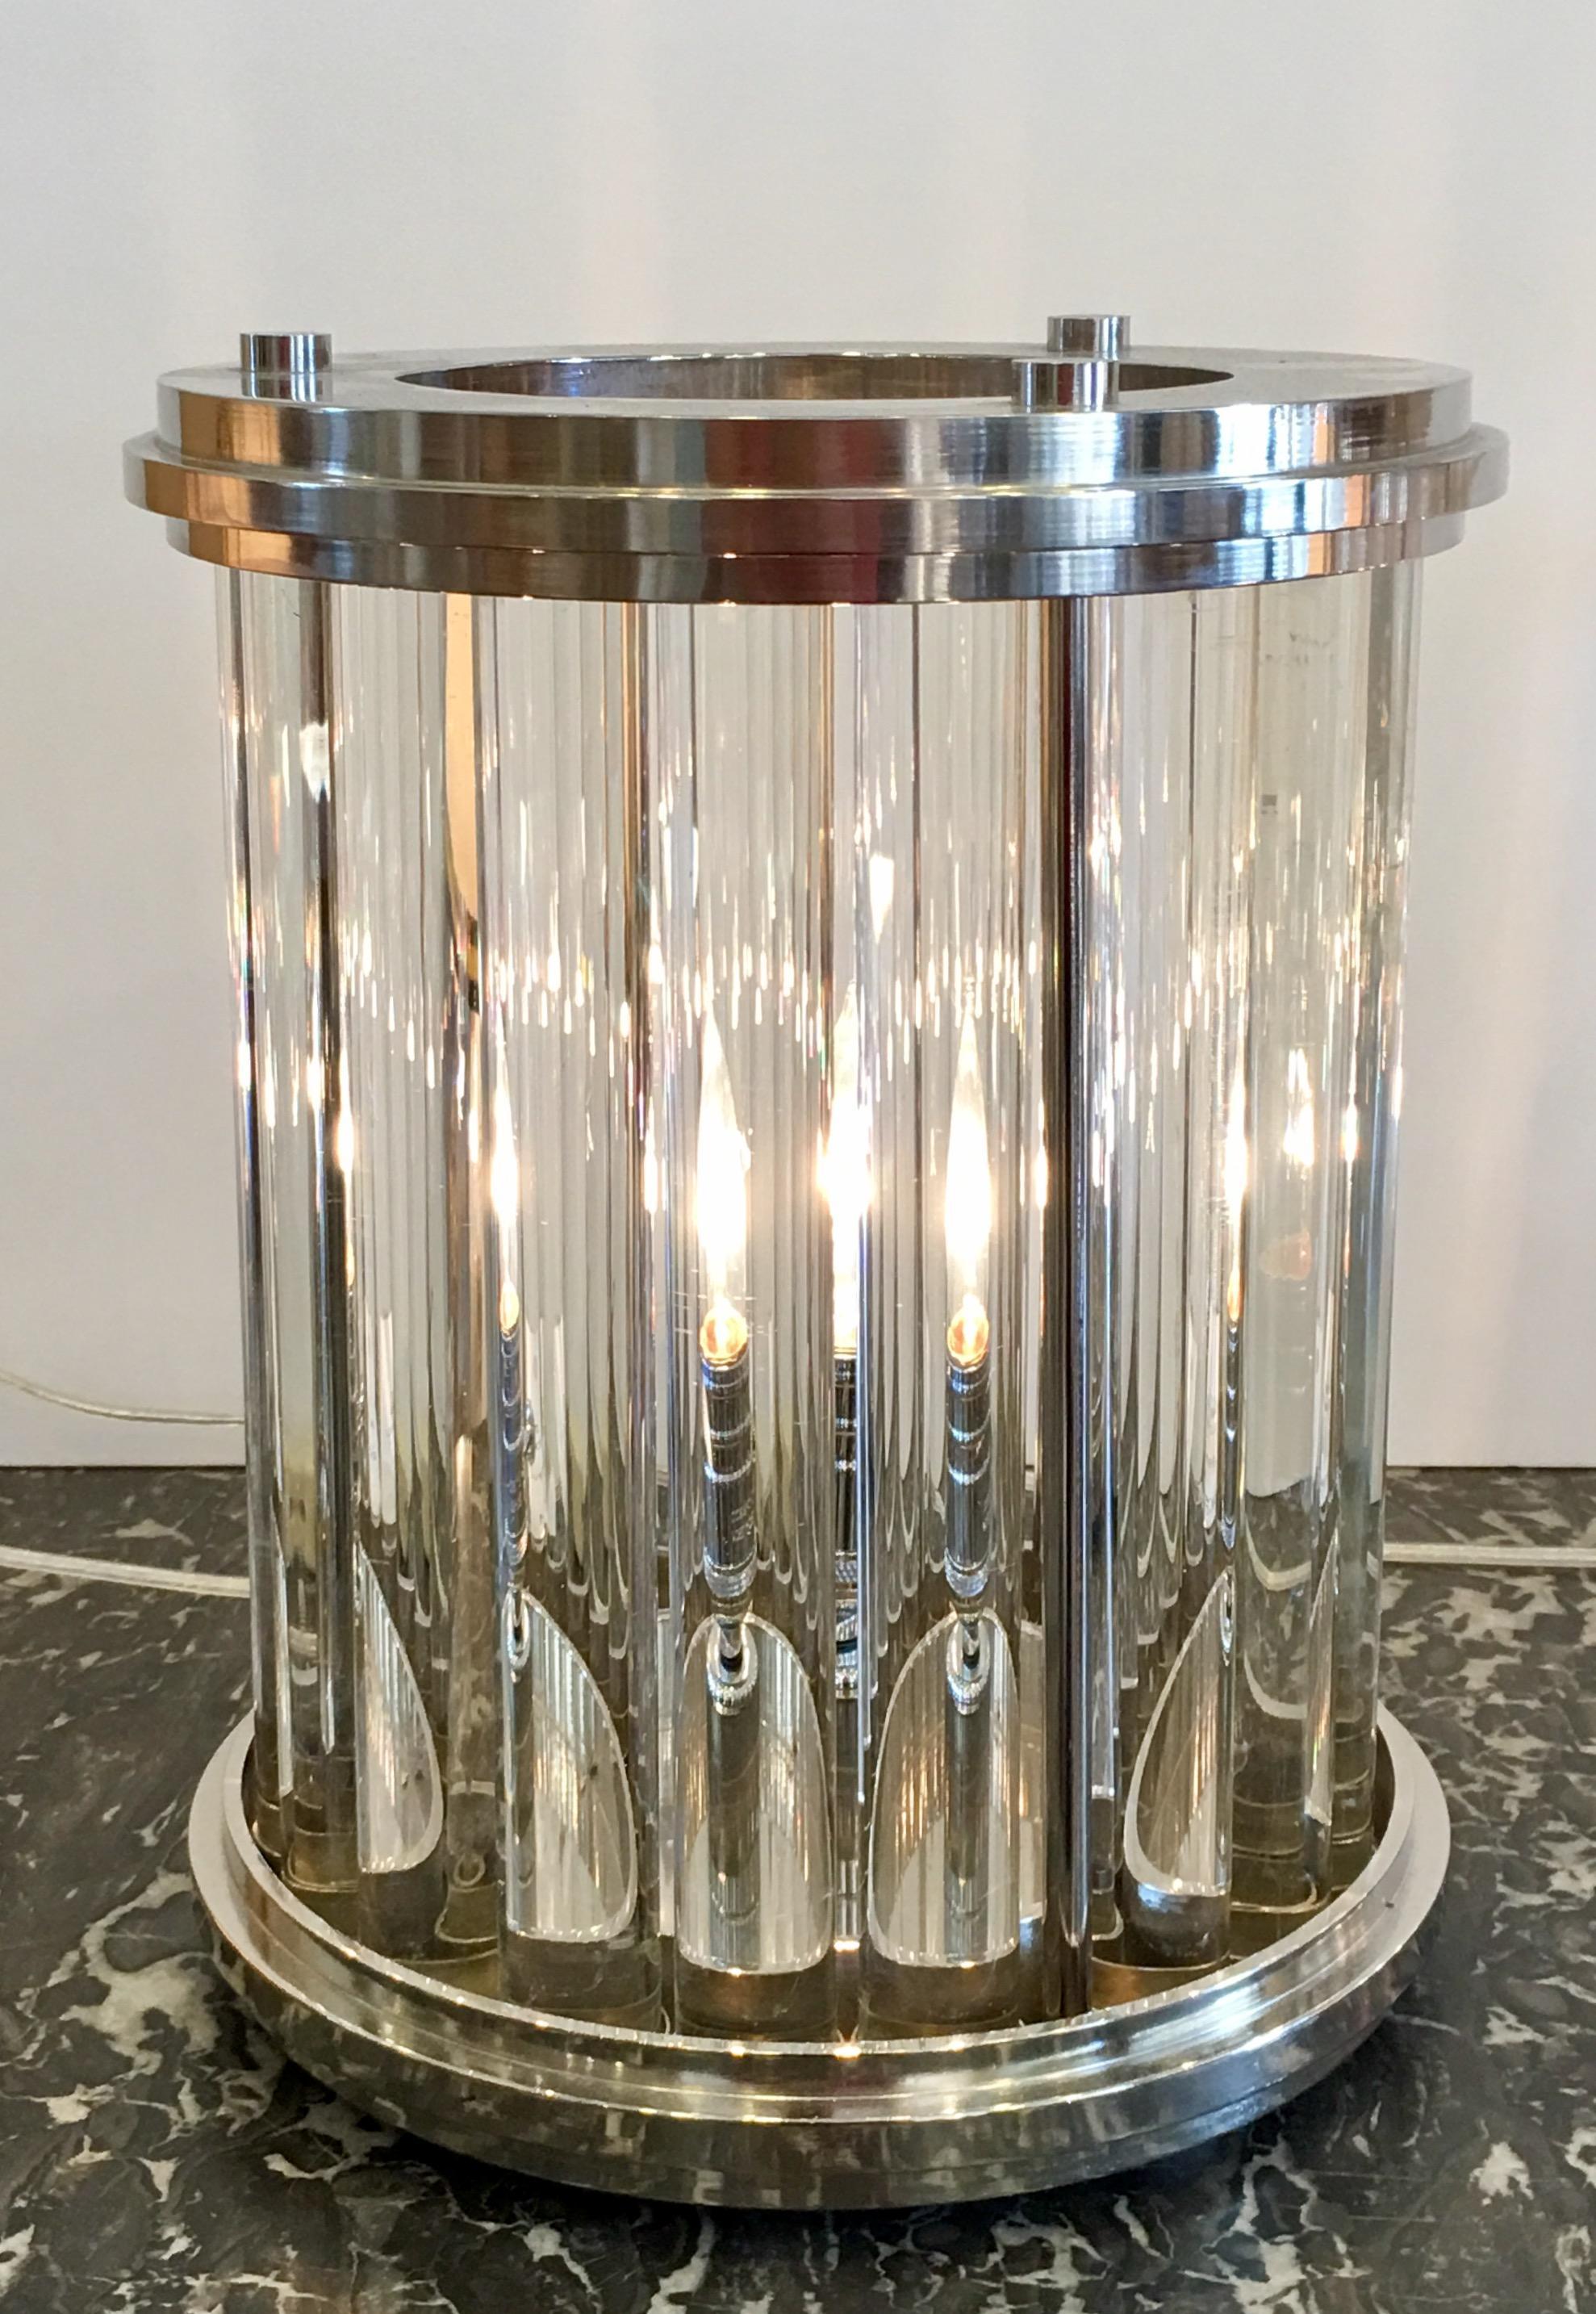 North American Pair of Art Deco Style Nickel-Plated Glass Rod Modernist Lamps by Randy Esada For Sale